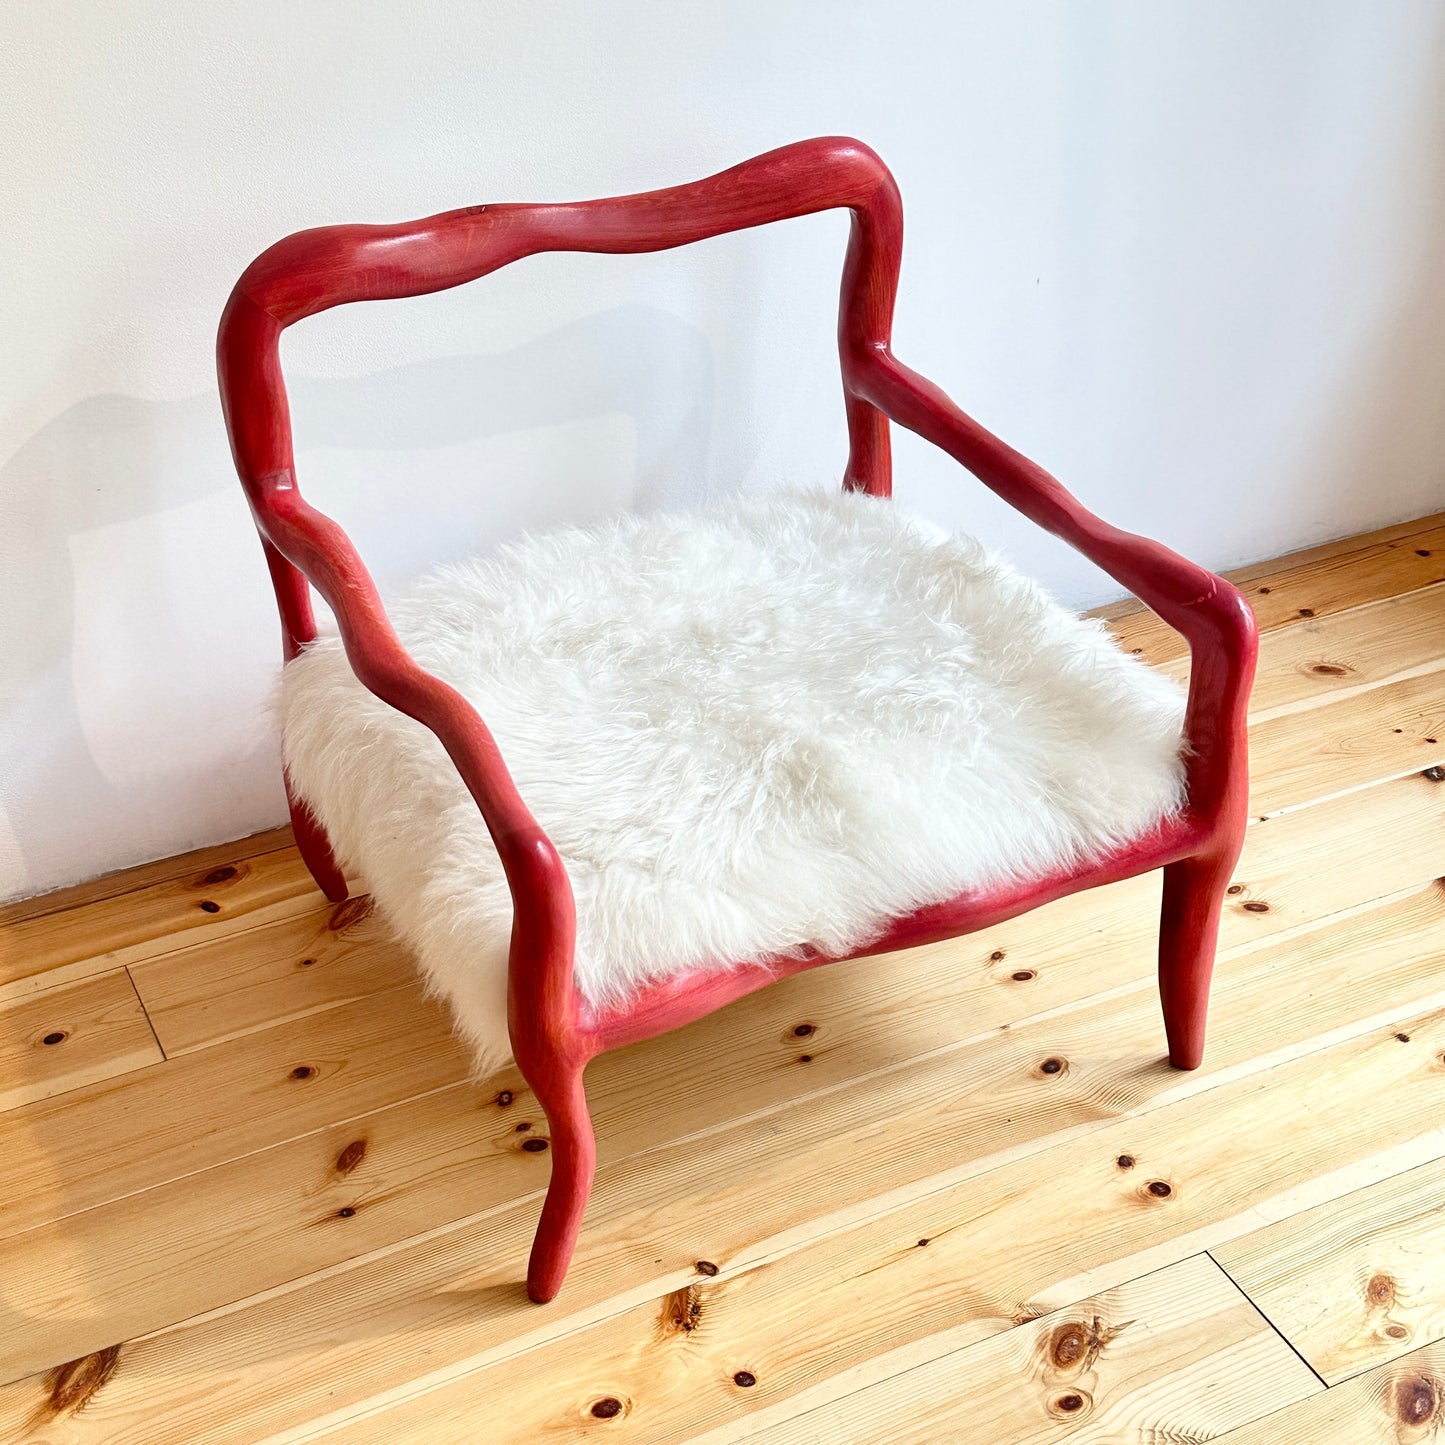 "Redpink" easy-chair by Niklas Runesson